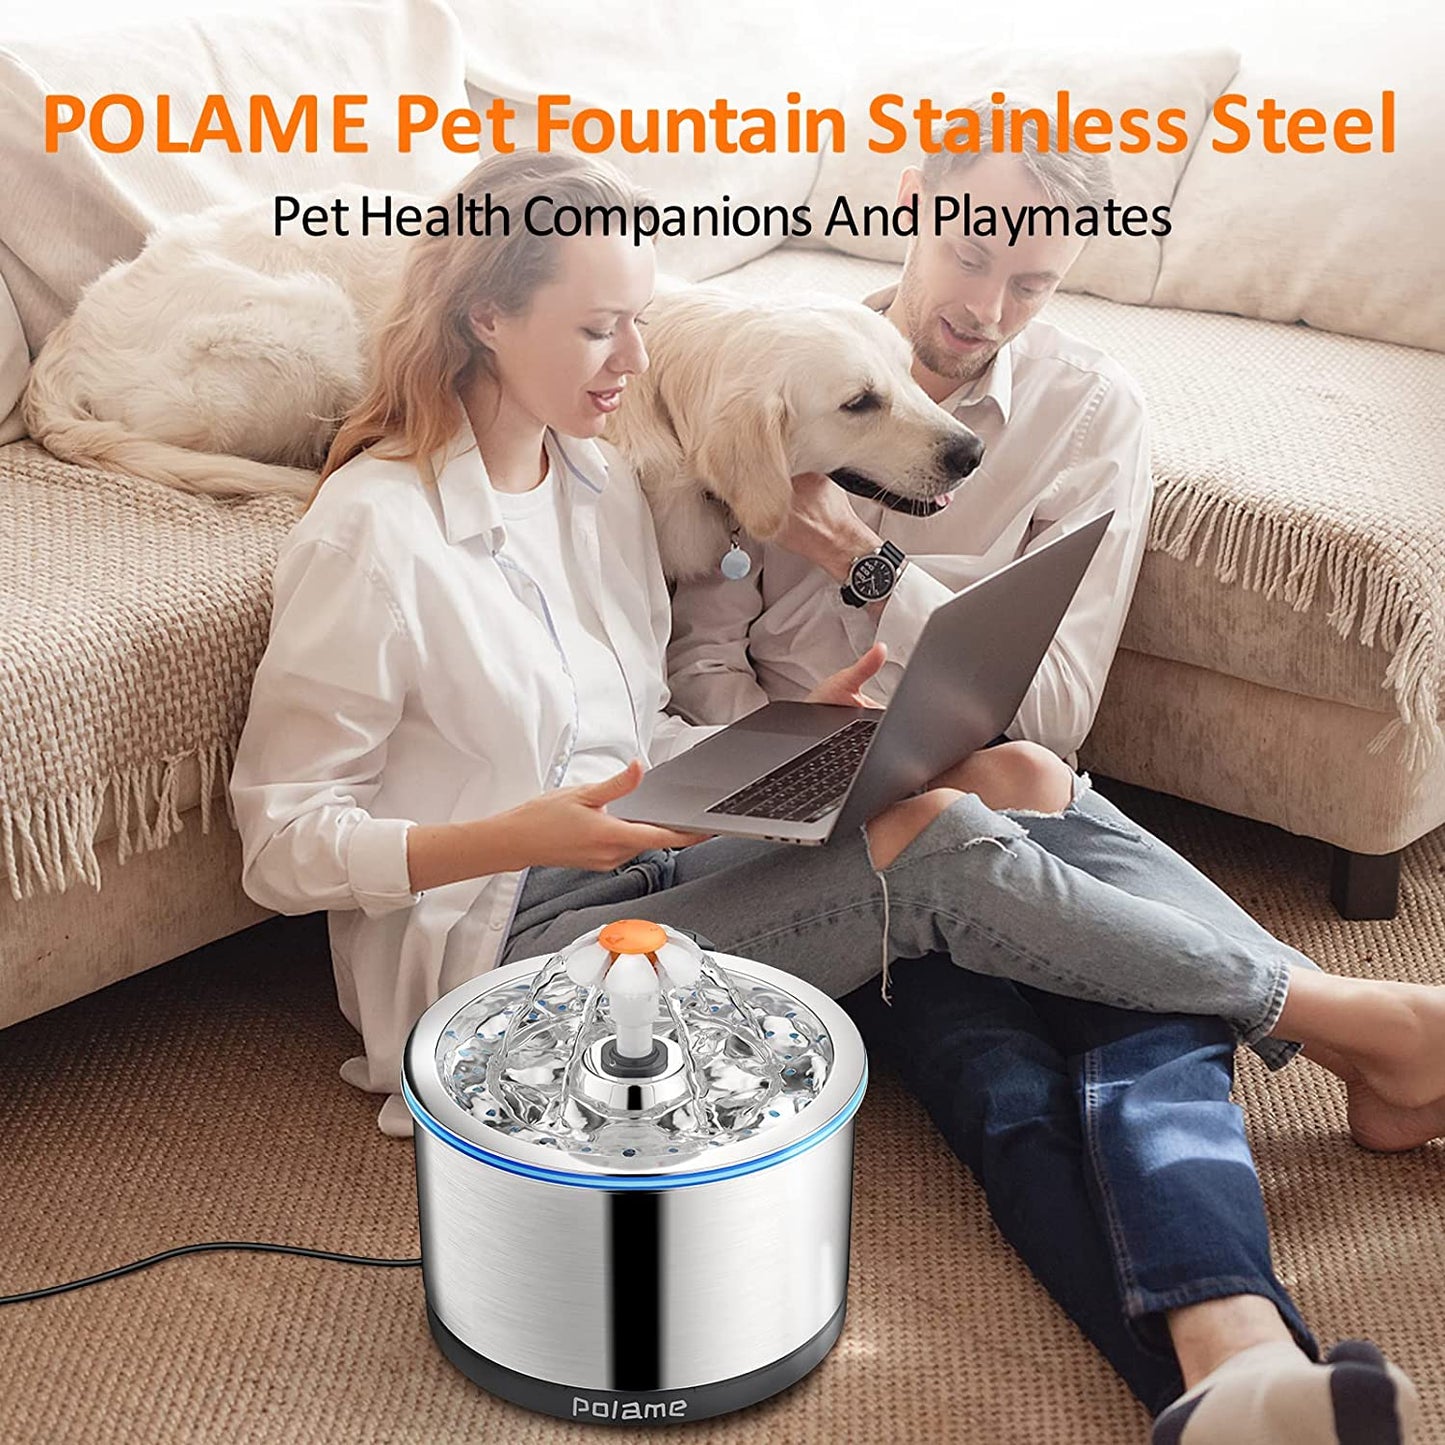 Cat Water Fountain Stainless Steel, Ultra-Quiet Cat Fountains for Drinking, Metal Cat Fountain Pet Water Fountain for Cats Inside, 84Oz/2.5L with Three Water Flow for Cats, Dogs